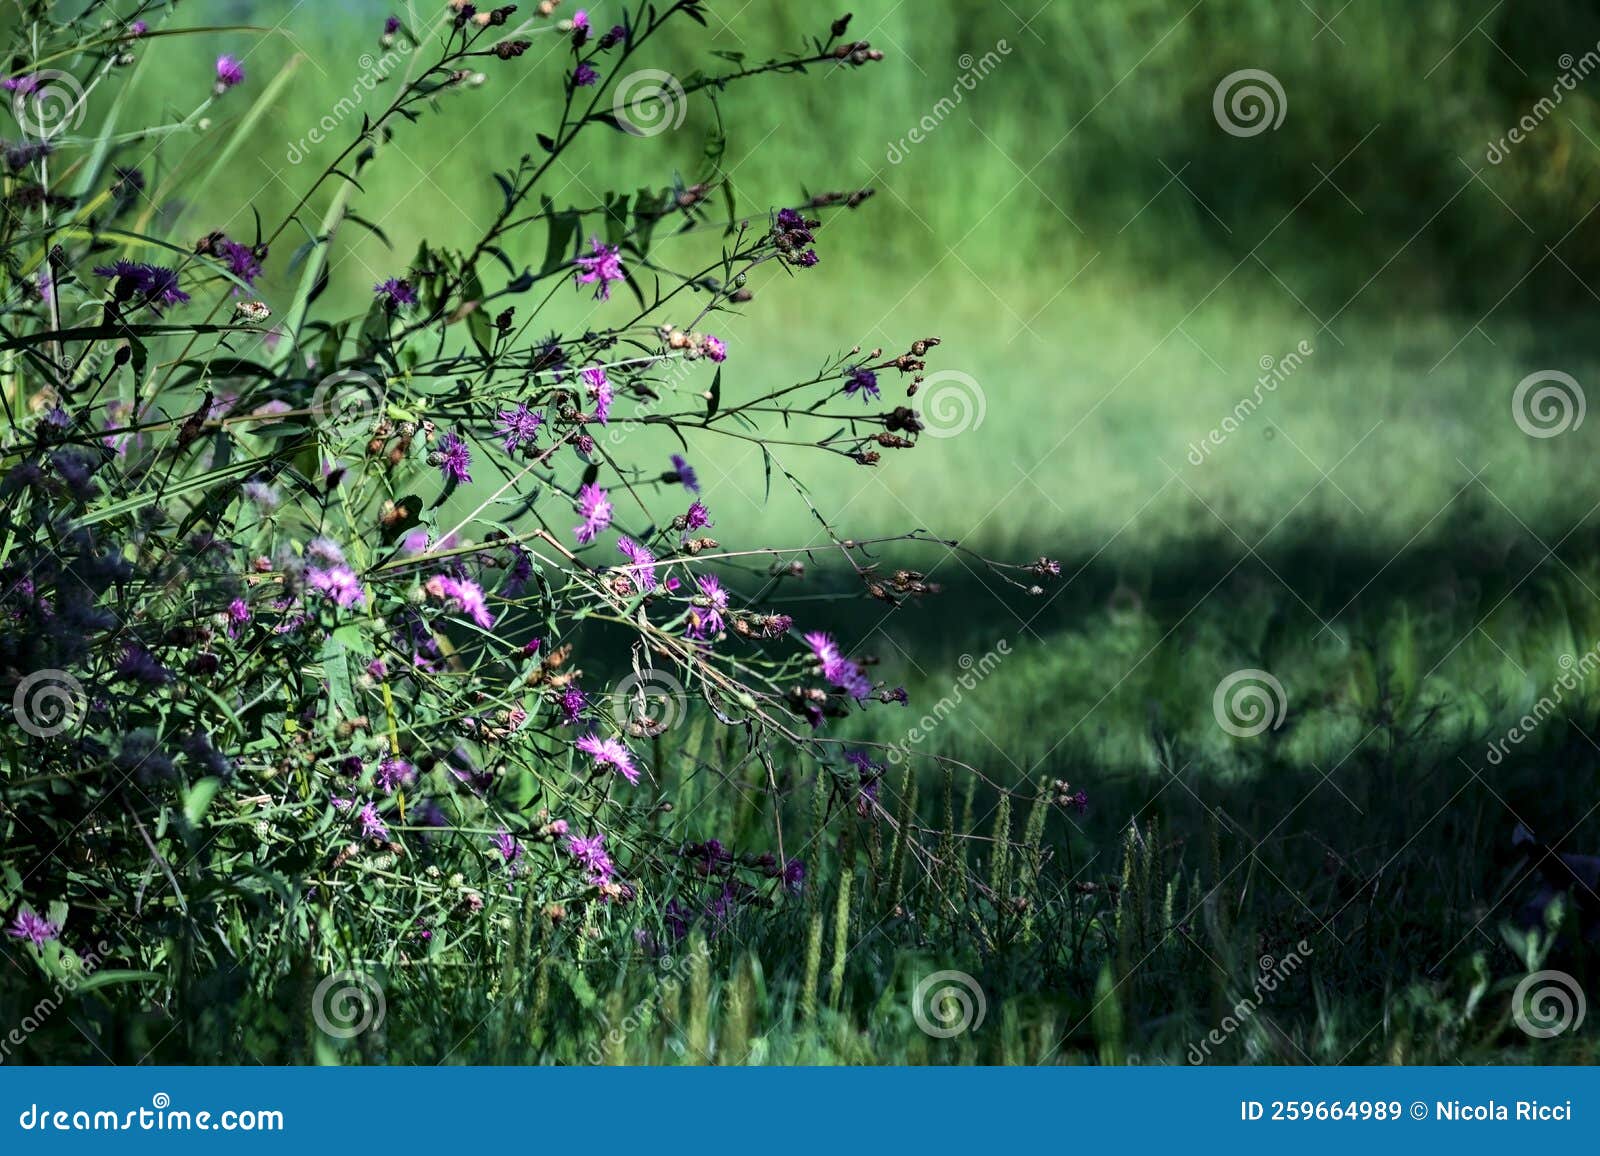 Violet Wild Flowers on a Lawn Stock Image - Image of design, field ...